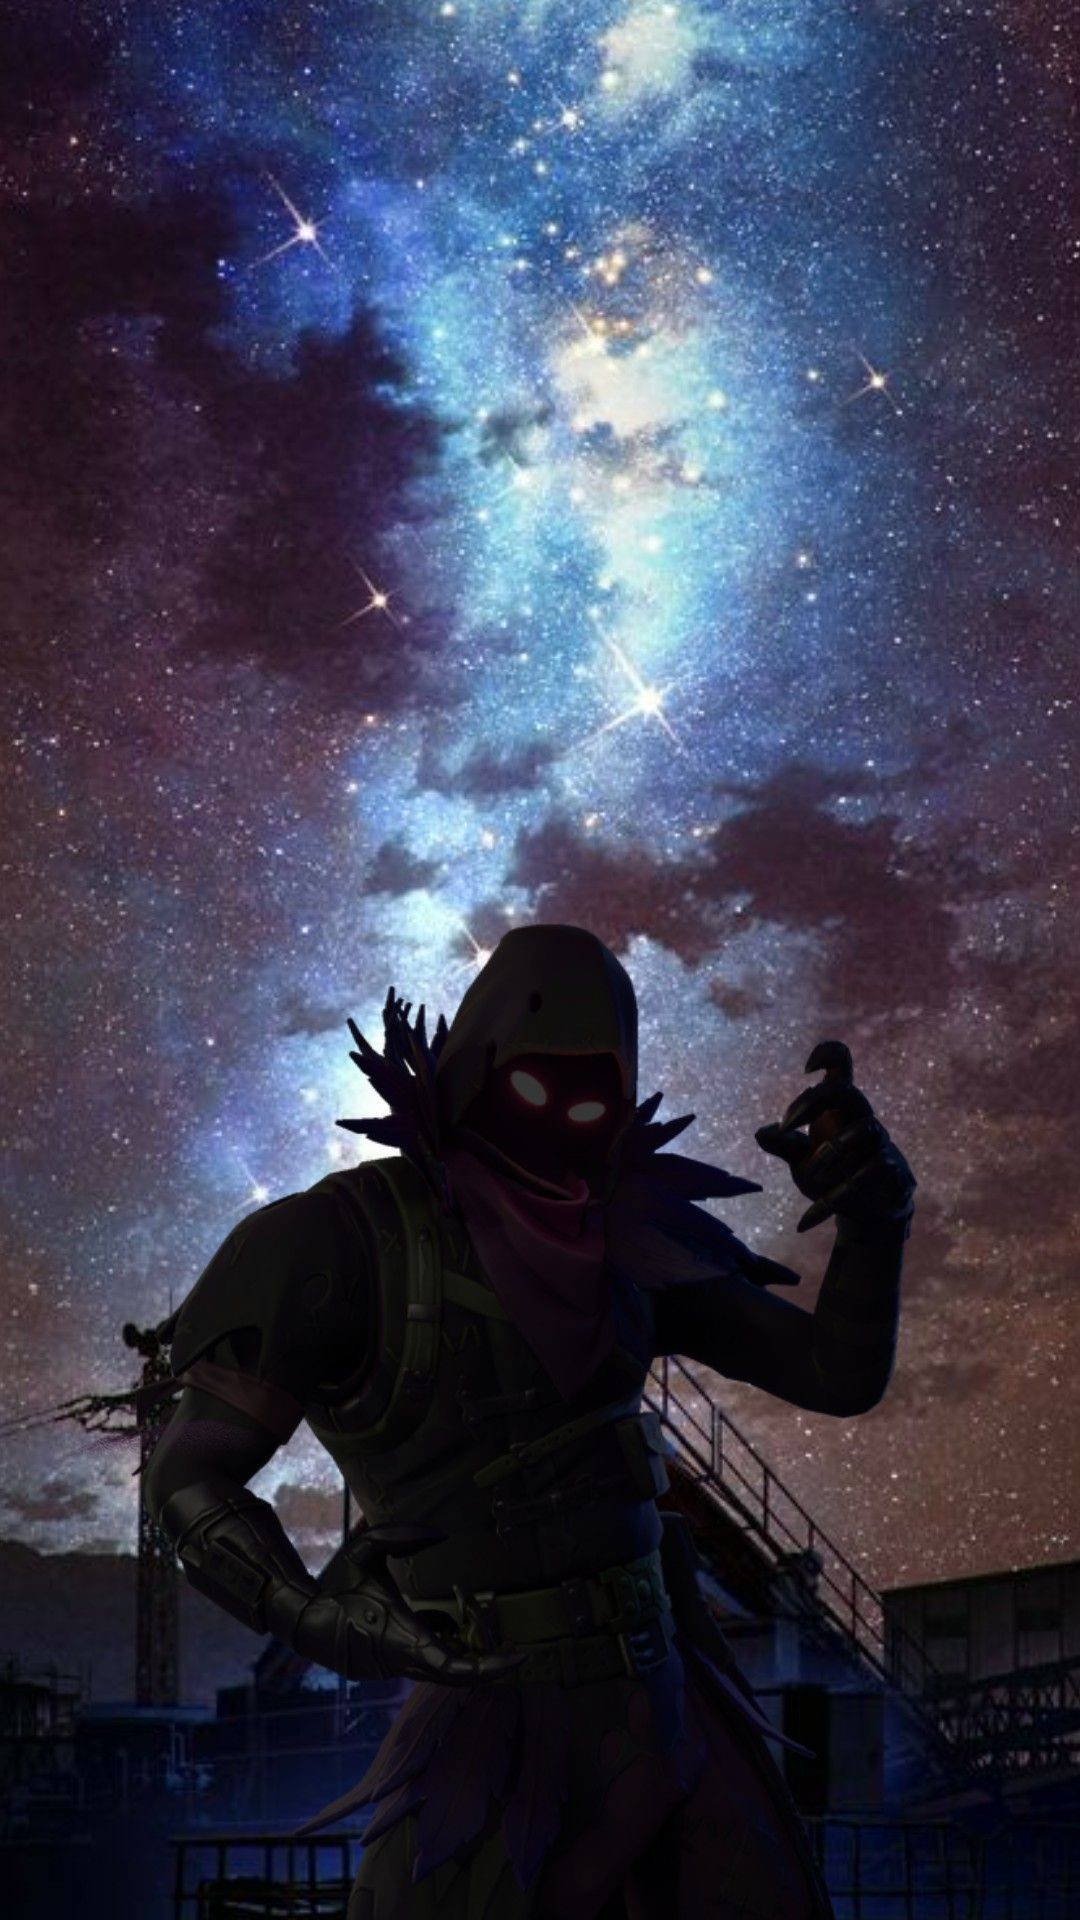 1080x1920 Gaming Wallpapers, Epic Games, Iphone Wallpaper, Epic Pictures, Game Art,  8th